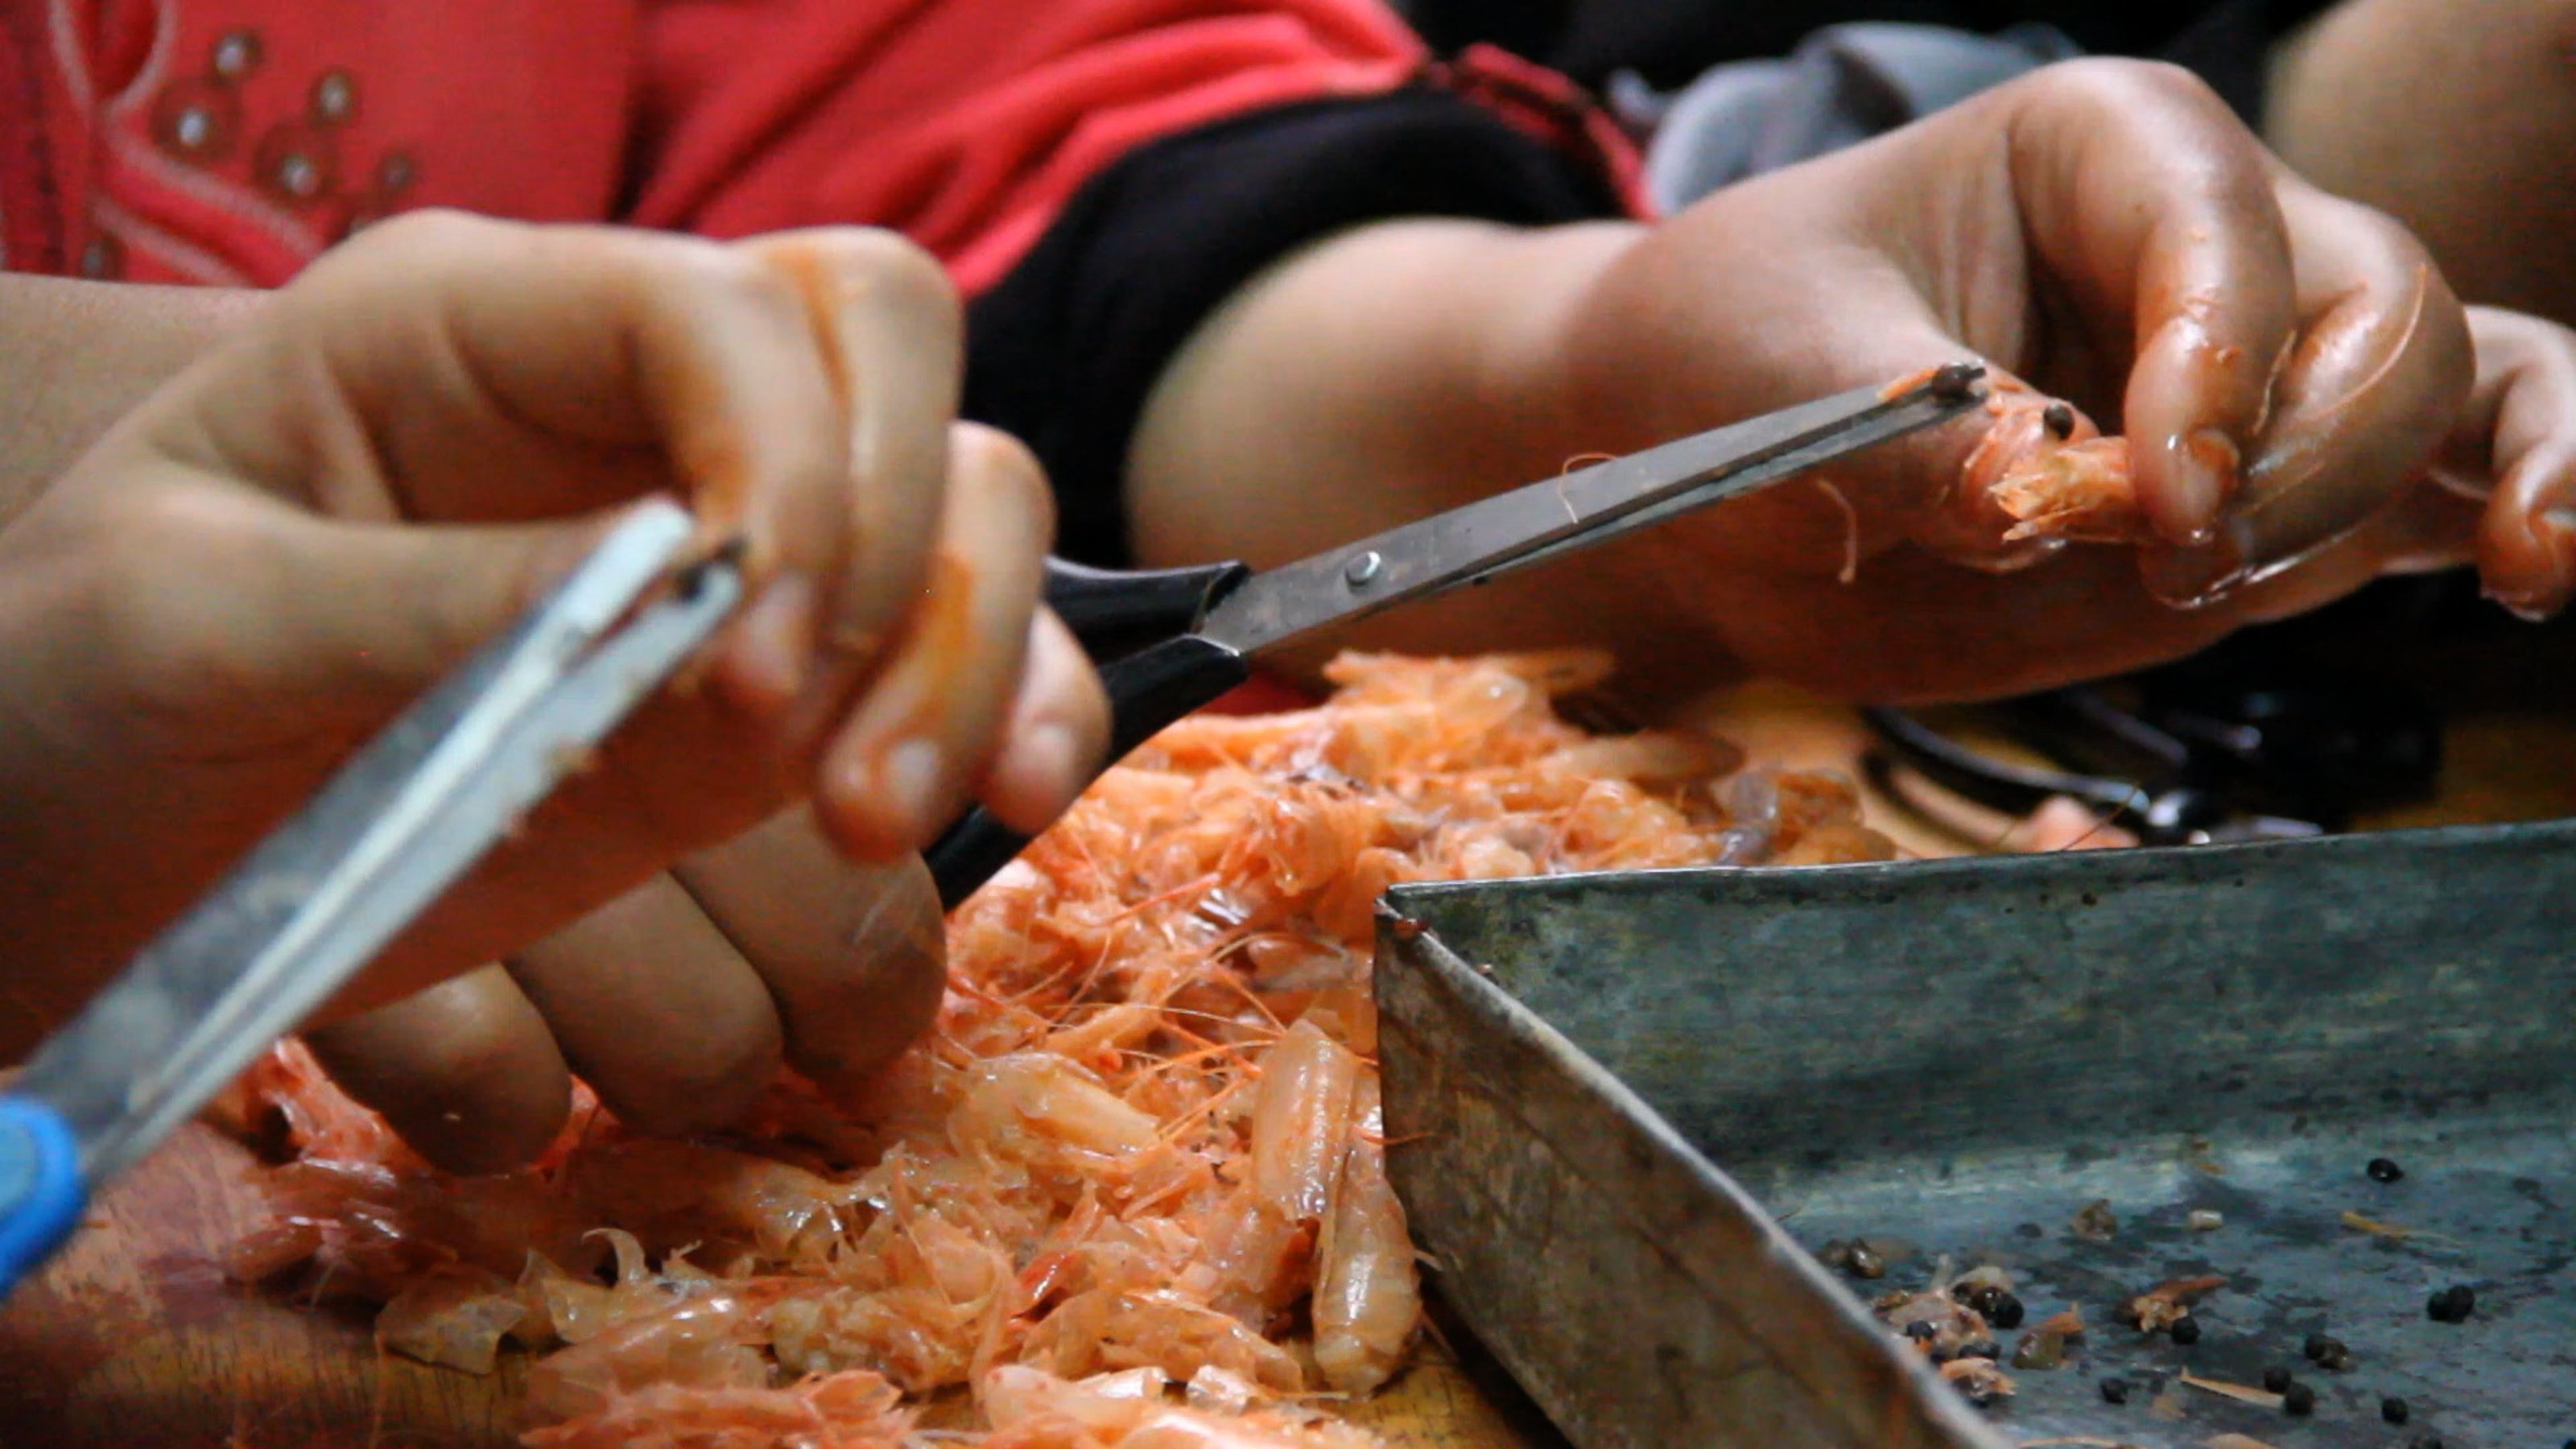 Worker plucking eyes from shrimp with scissors